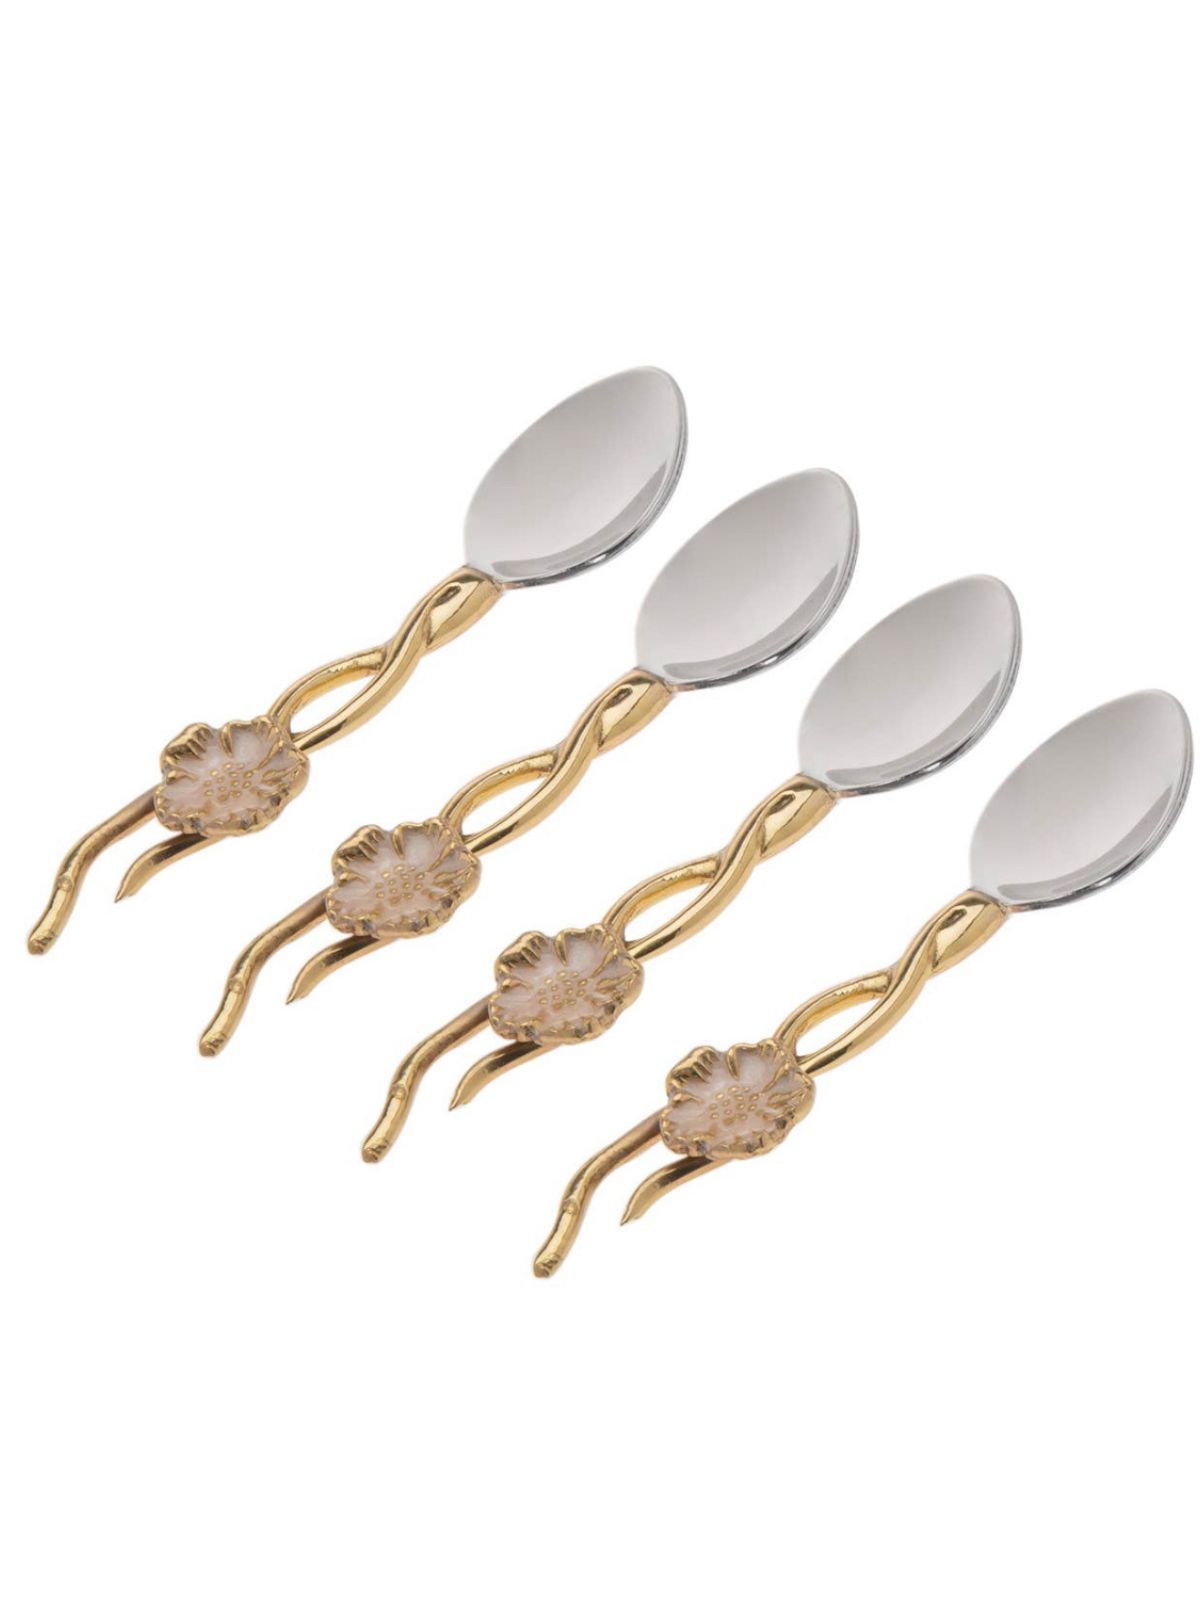 Stainless Steel  Dessert Spoons Set with Gold Flower Designed Handles.